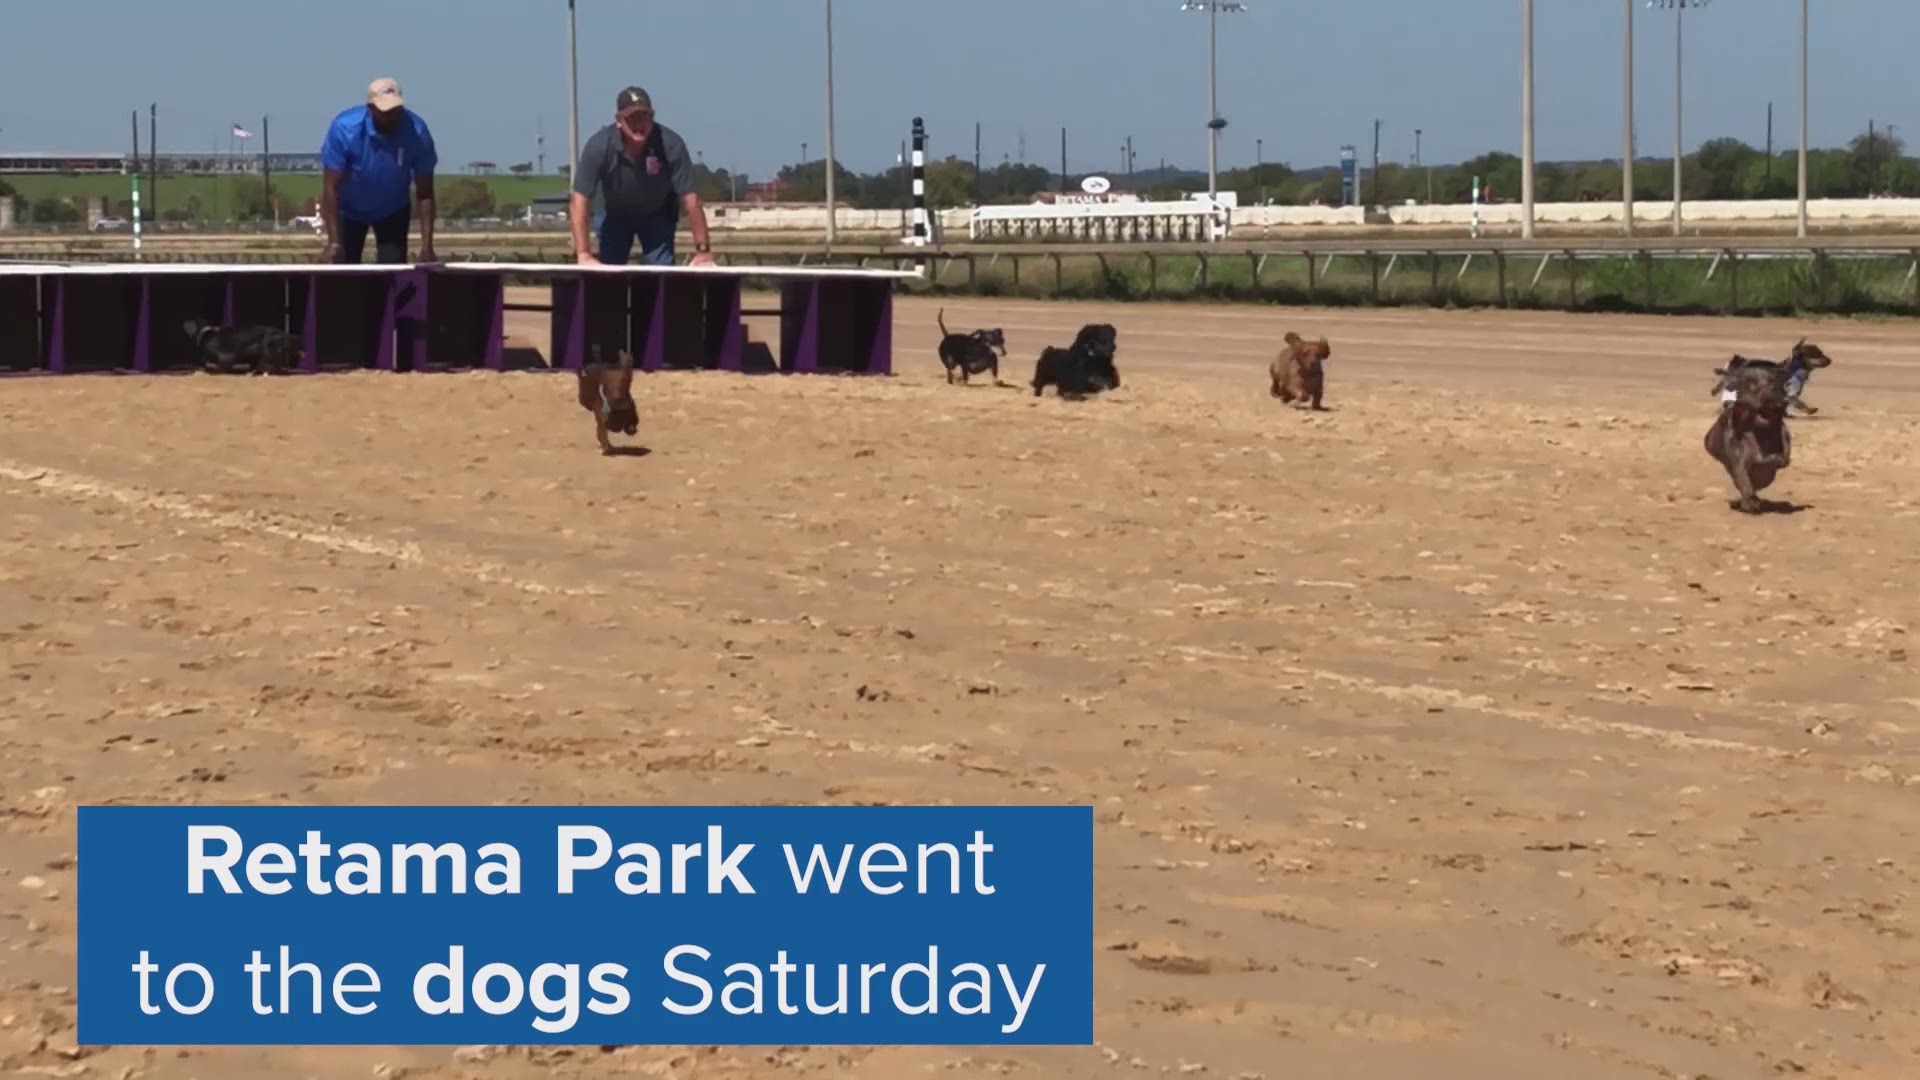 Dachshund races on the track at Retama Park highlighted the family event on Saturday.